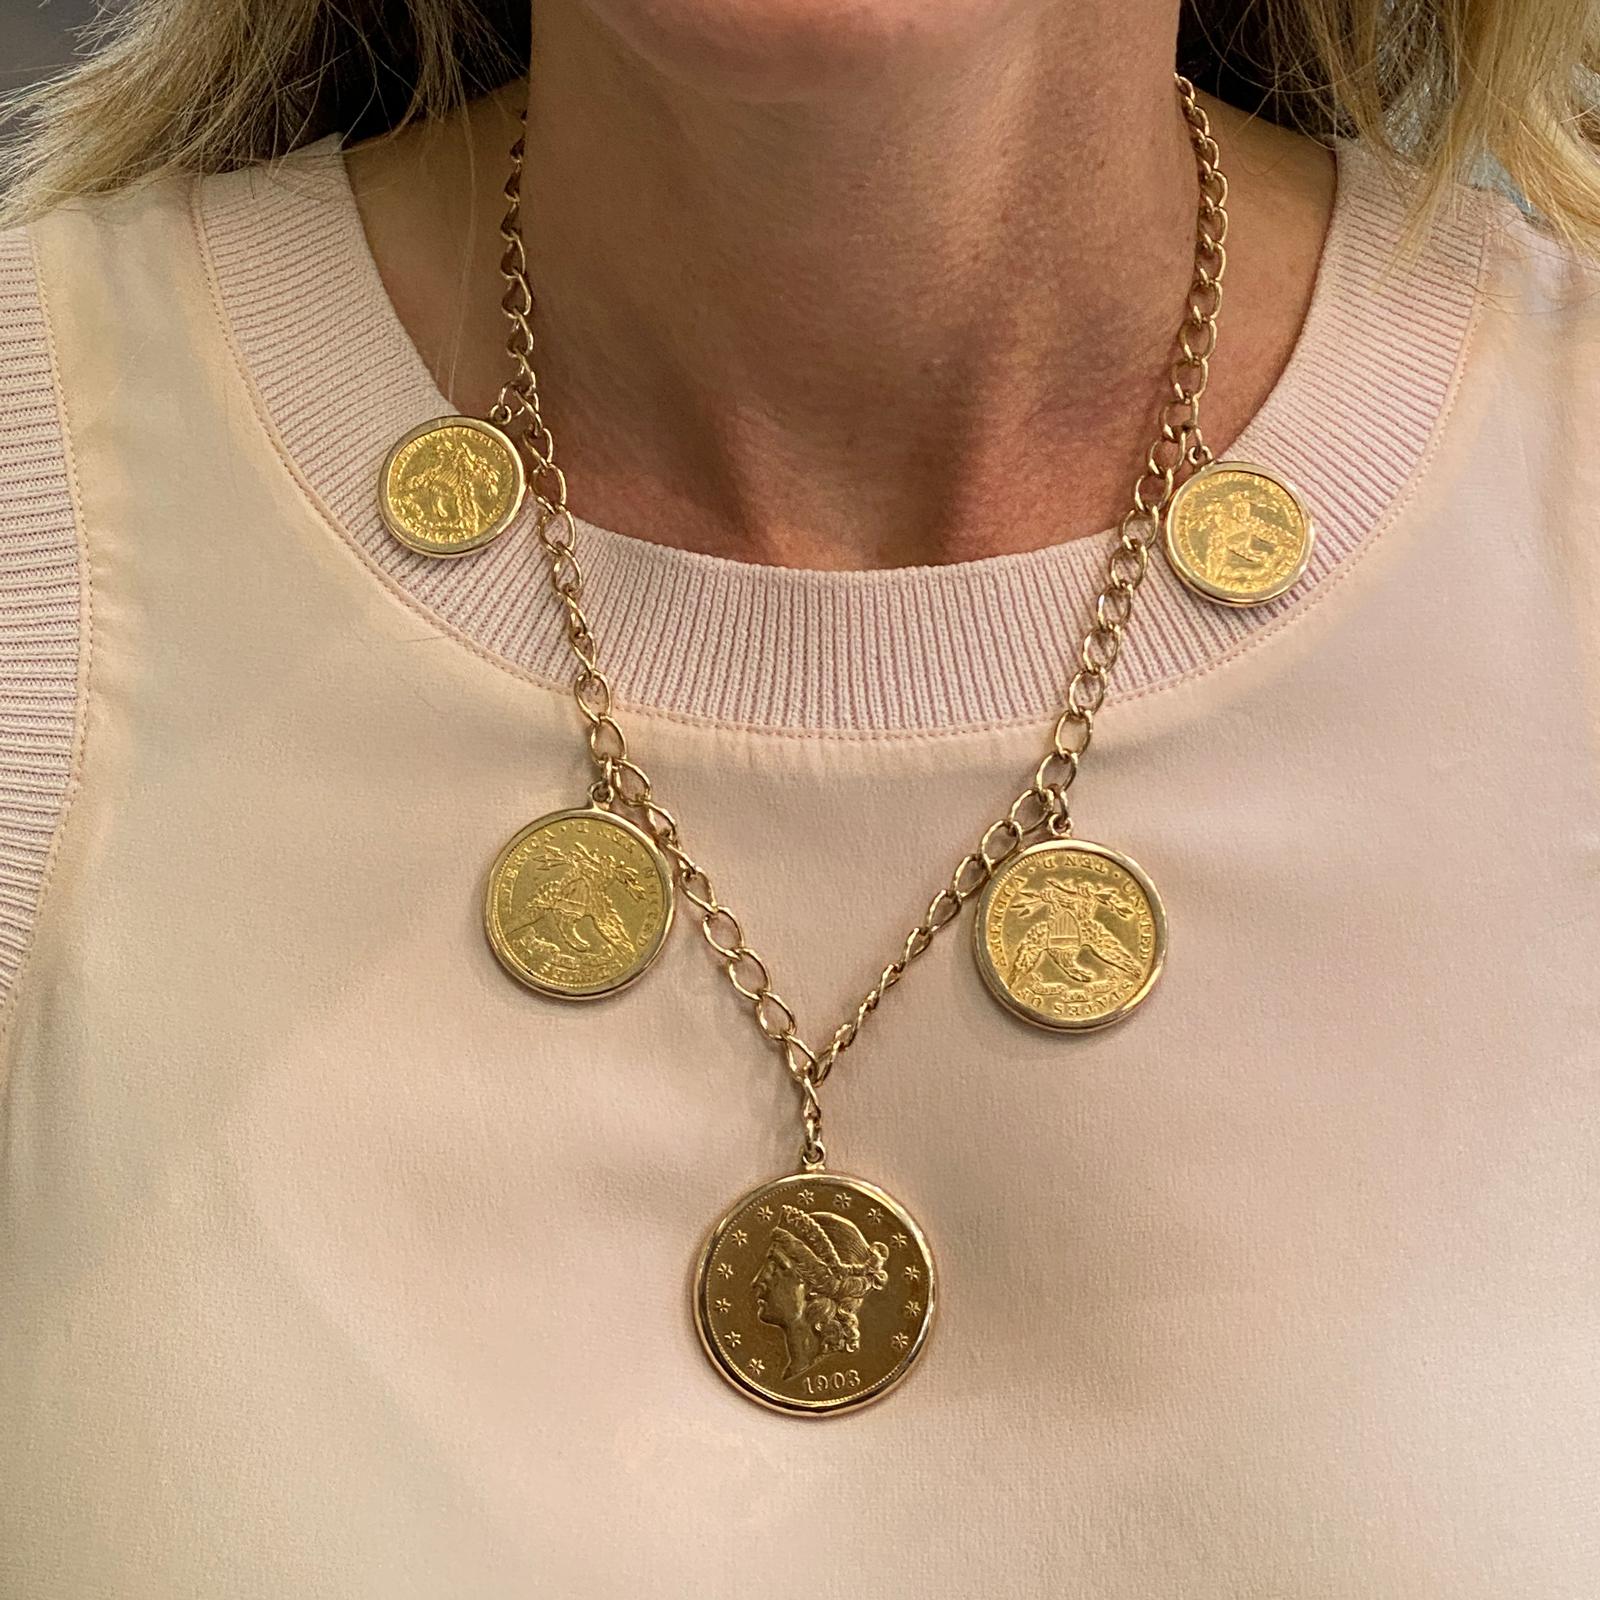 US Gold Coin dangle necklace fashioned in 90% gold coins and 14 karat yellow gold. The necklace features 1-$20 US gold coin, 2-$10 US gold coins, and 2-$5 US gold coins dangling from an open 18 inch gold chain. The net weight of the coins is 93